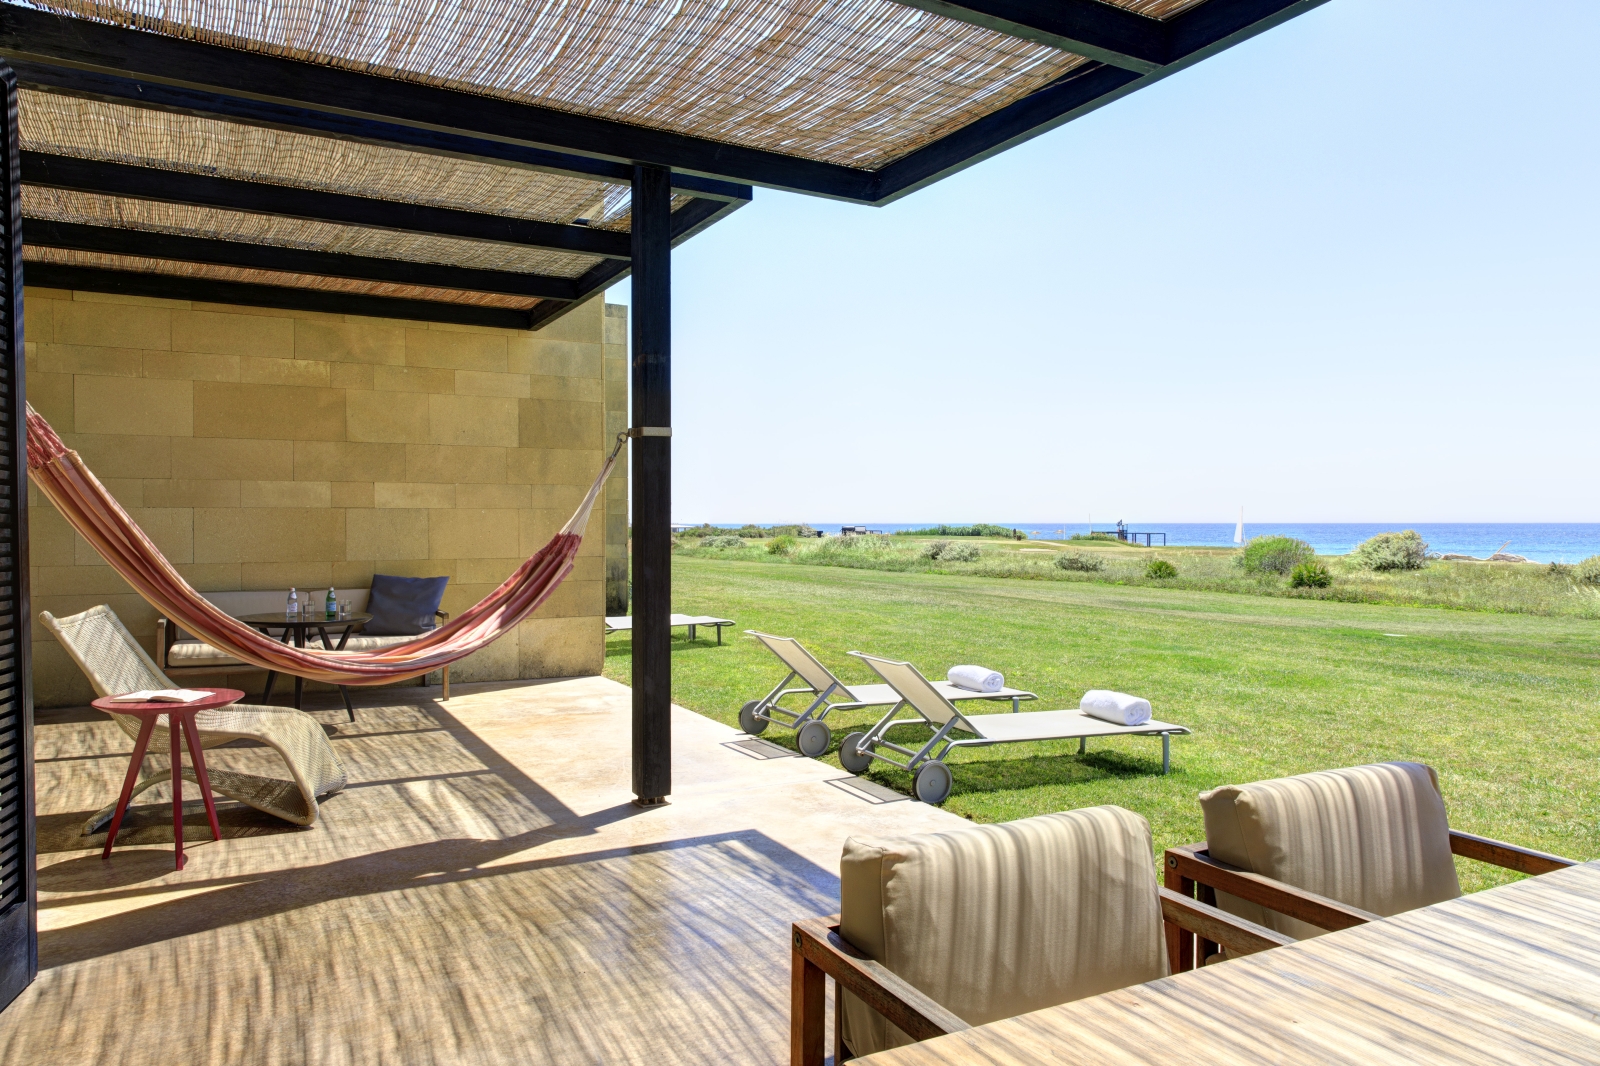 Grand Suite Terrace view with hammock at Verdura Resort in Italy